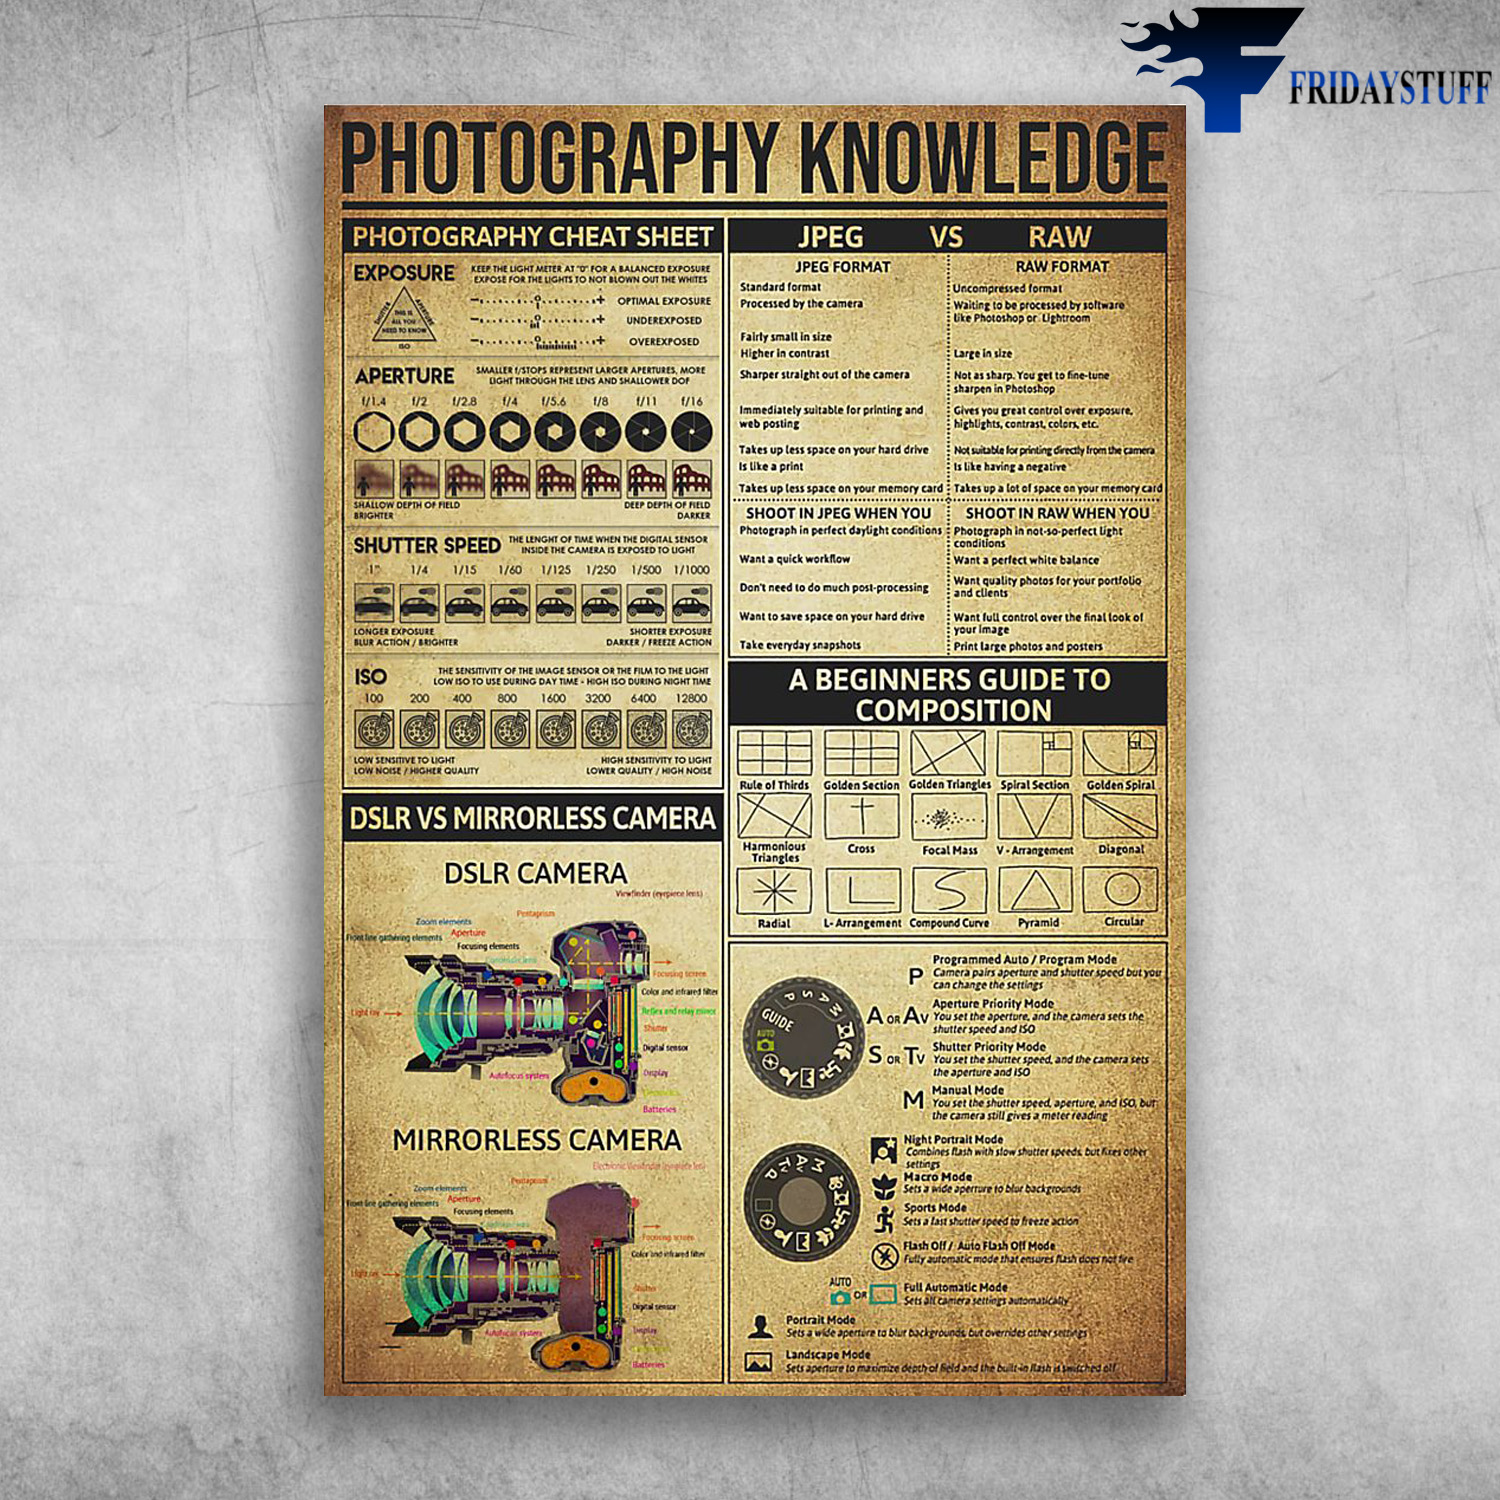 Photography Knowledge - Photography Cheat Sheet, JPEG VS RAW, A Beginners Guide To Composition, DSLR Vs Mirrorless Camera,